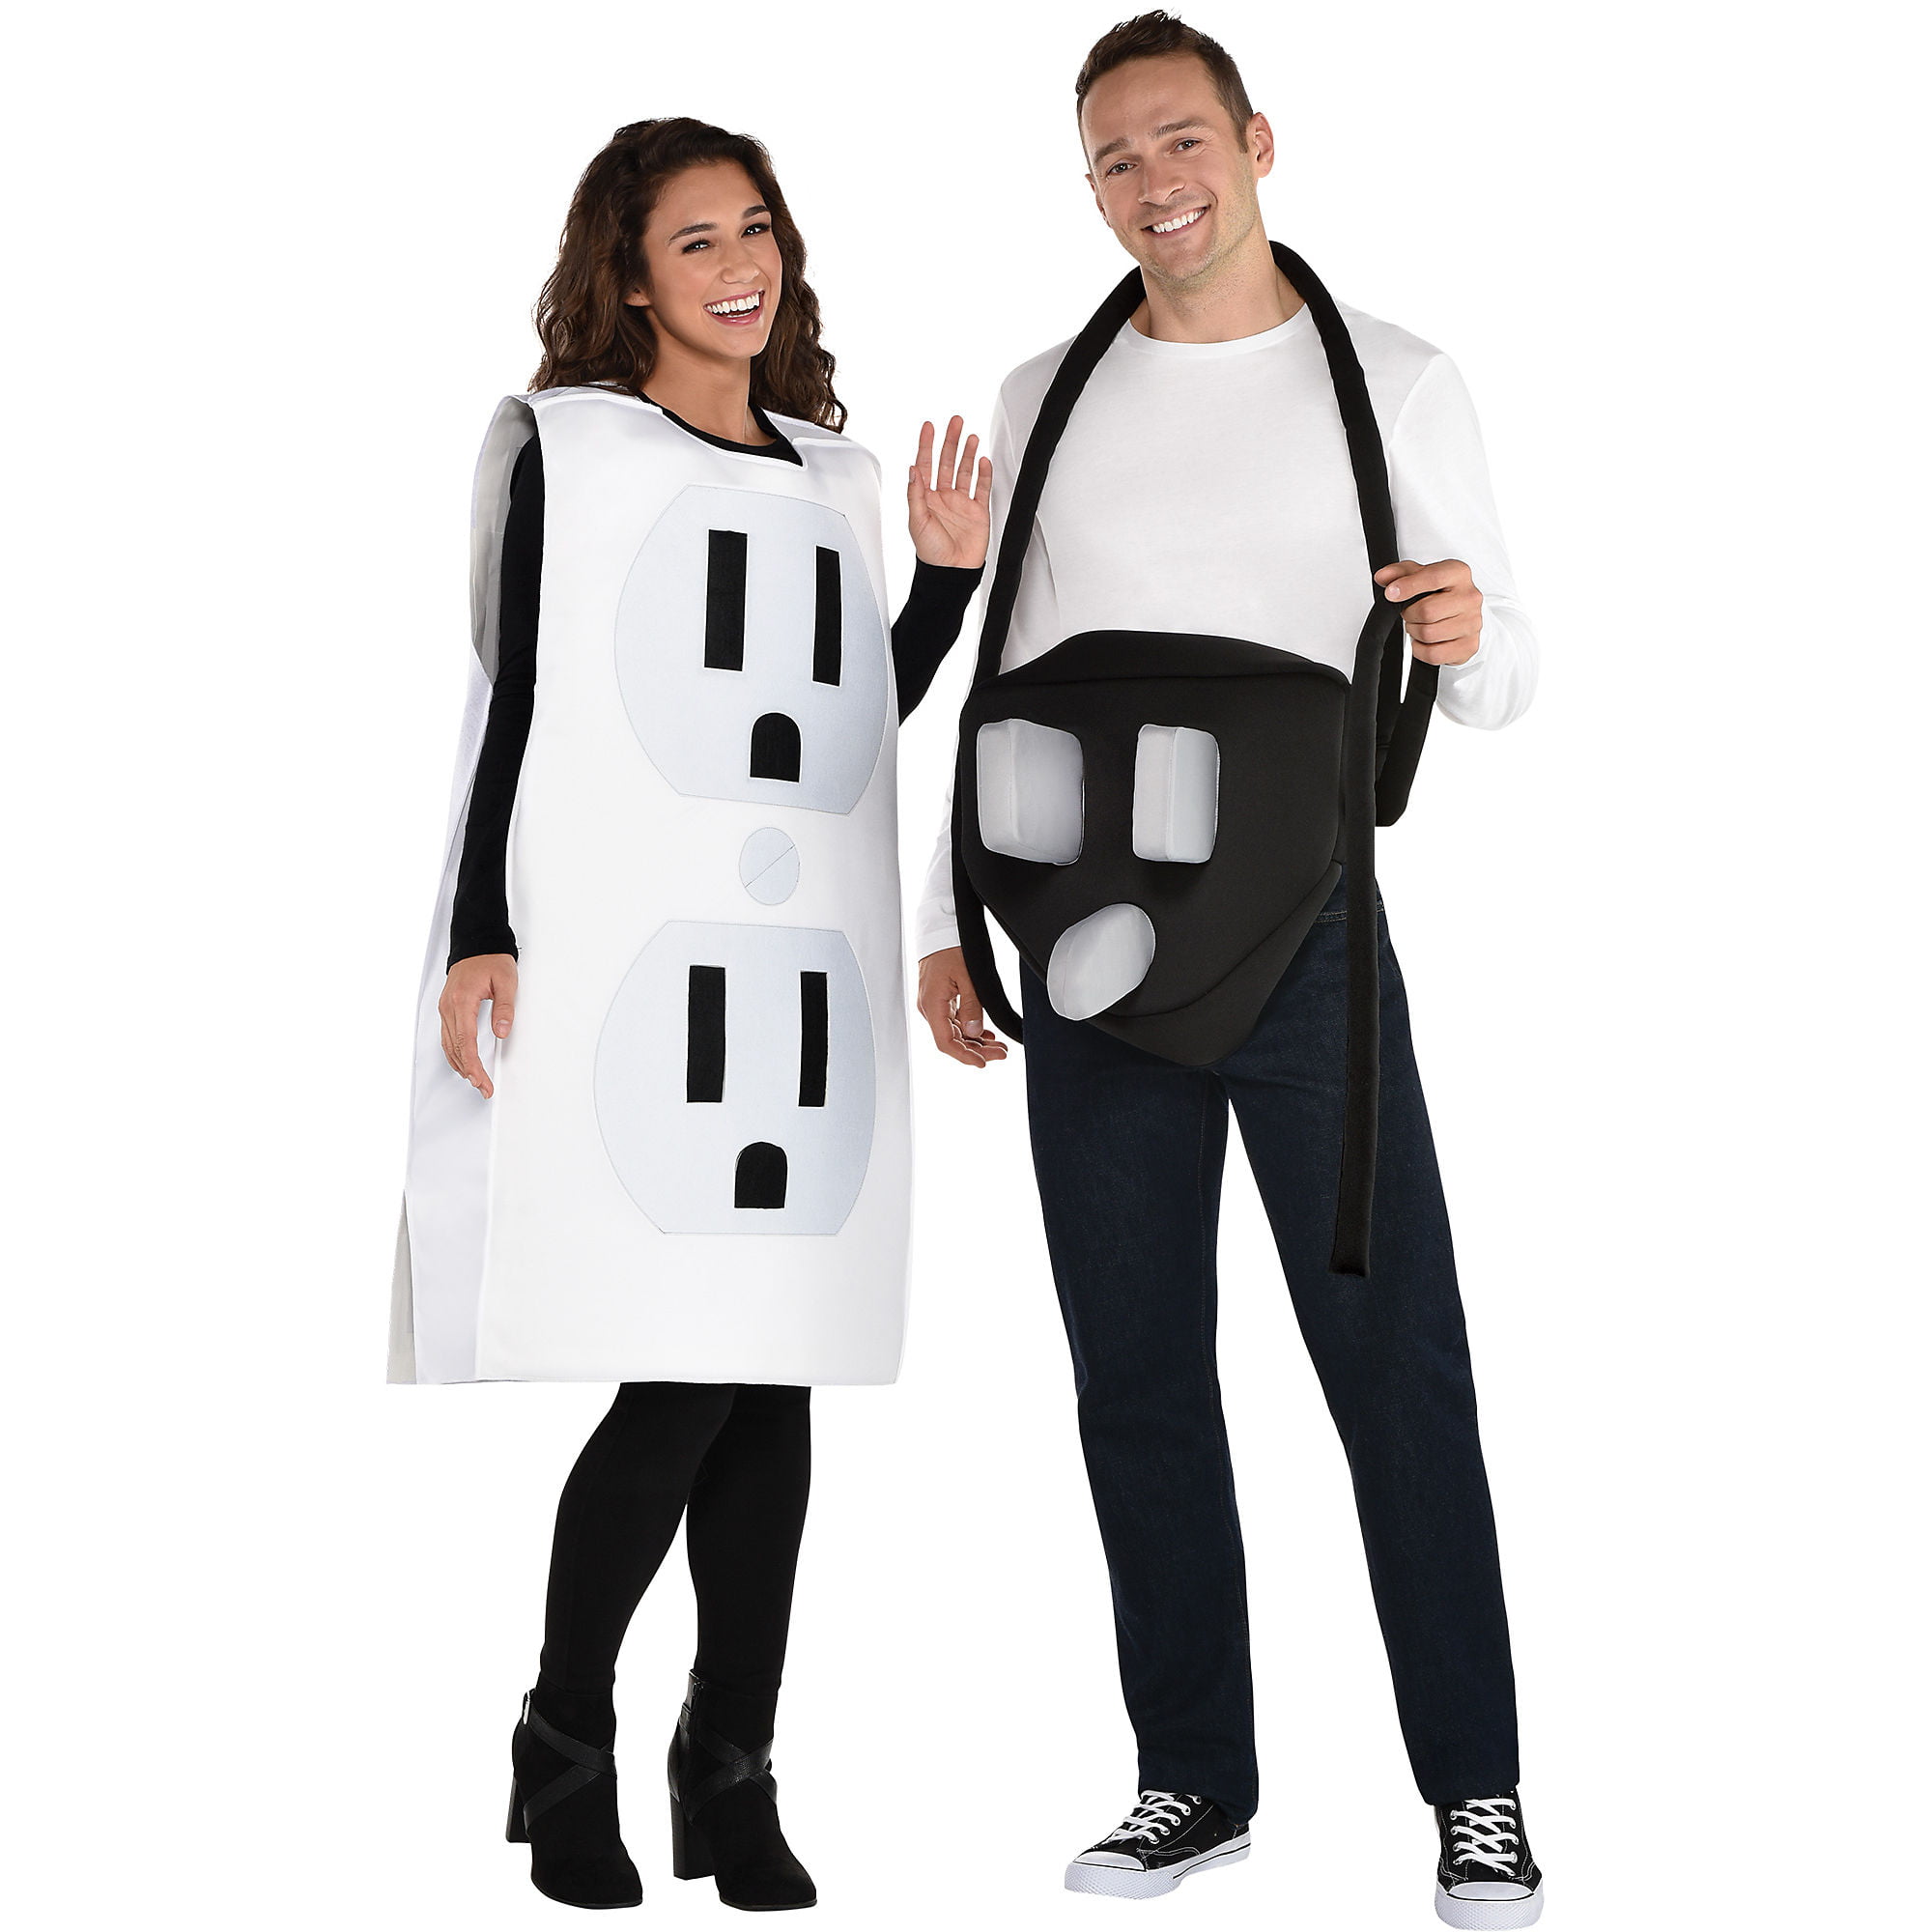 Party City Power Couple Halloween Costume for Adults, Standard Size, Includes Socket Tunic and Plug with Cord Costume - Walmart.com